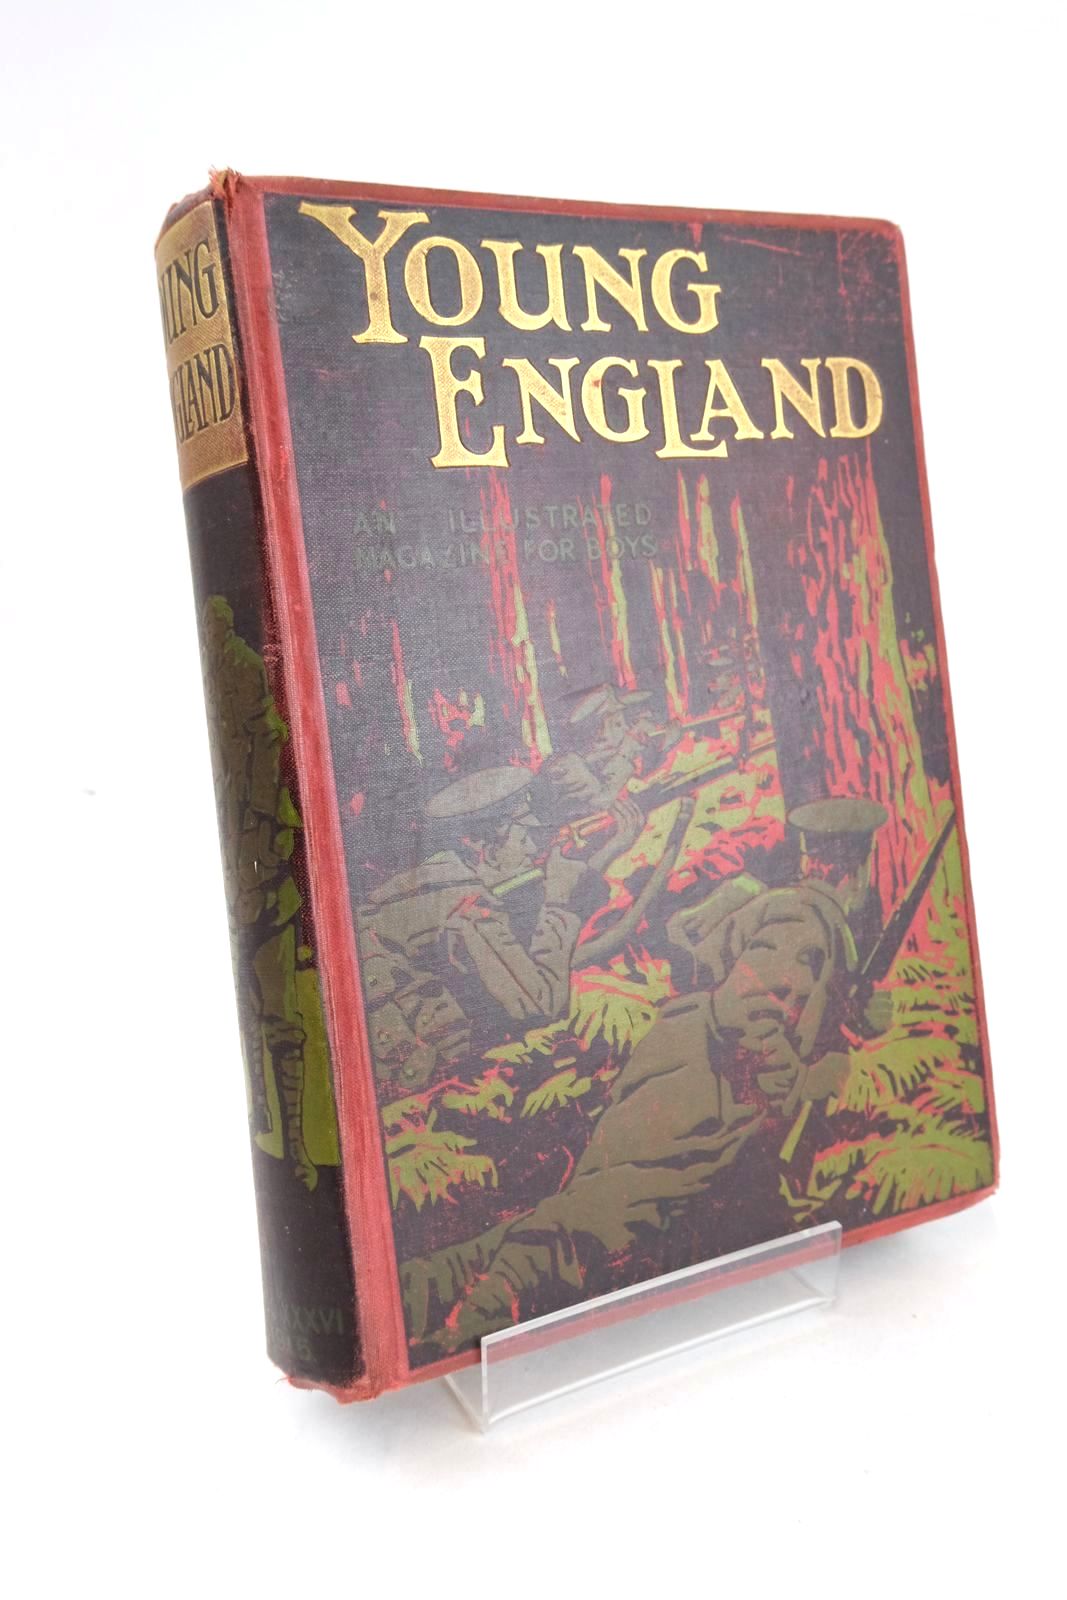 Photo of YOUNG ENGLAND (36th ANNUAL) written by Eady, K.M. Walker, Rowland Bridges, T.C. et al, illustrated by Holloway, Edgar Campbell, John F. Osborne, Rex et al., published by Pilgrim Press (STOCK CODE: 1325947)  for sale by Stella & Rose's Books